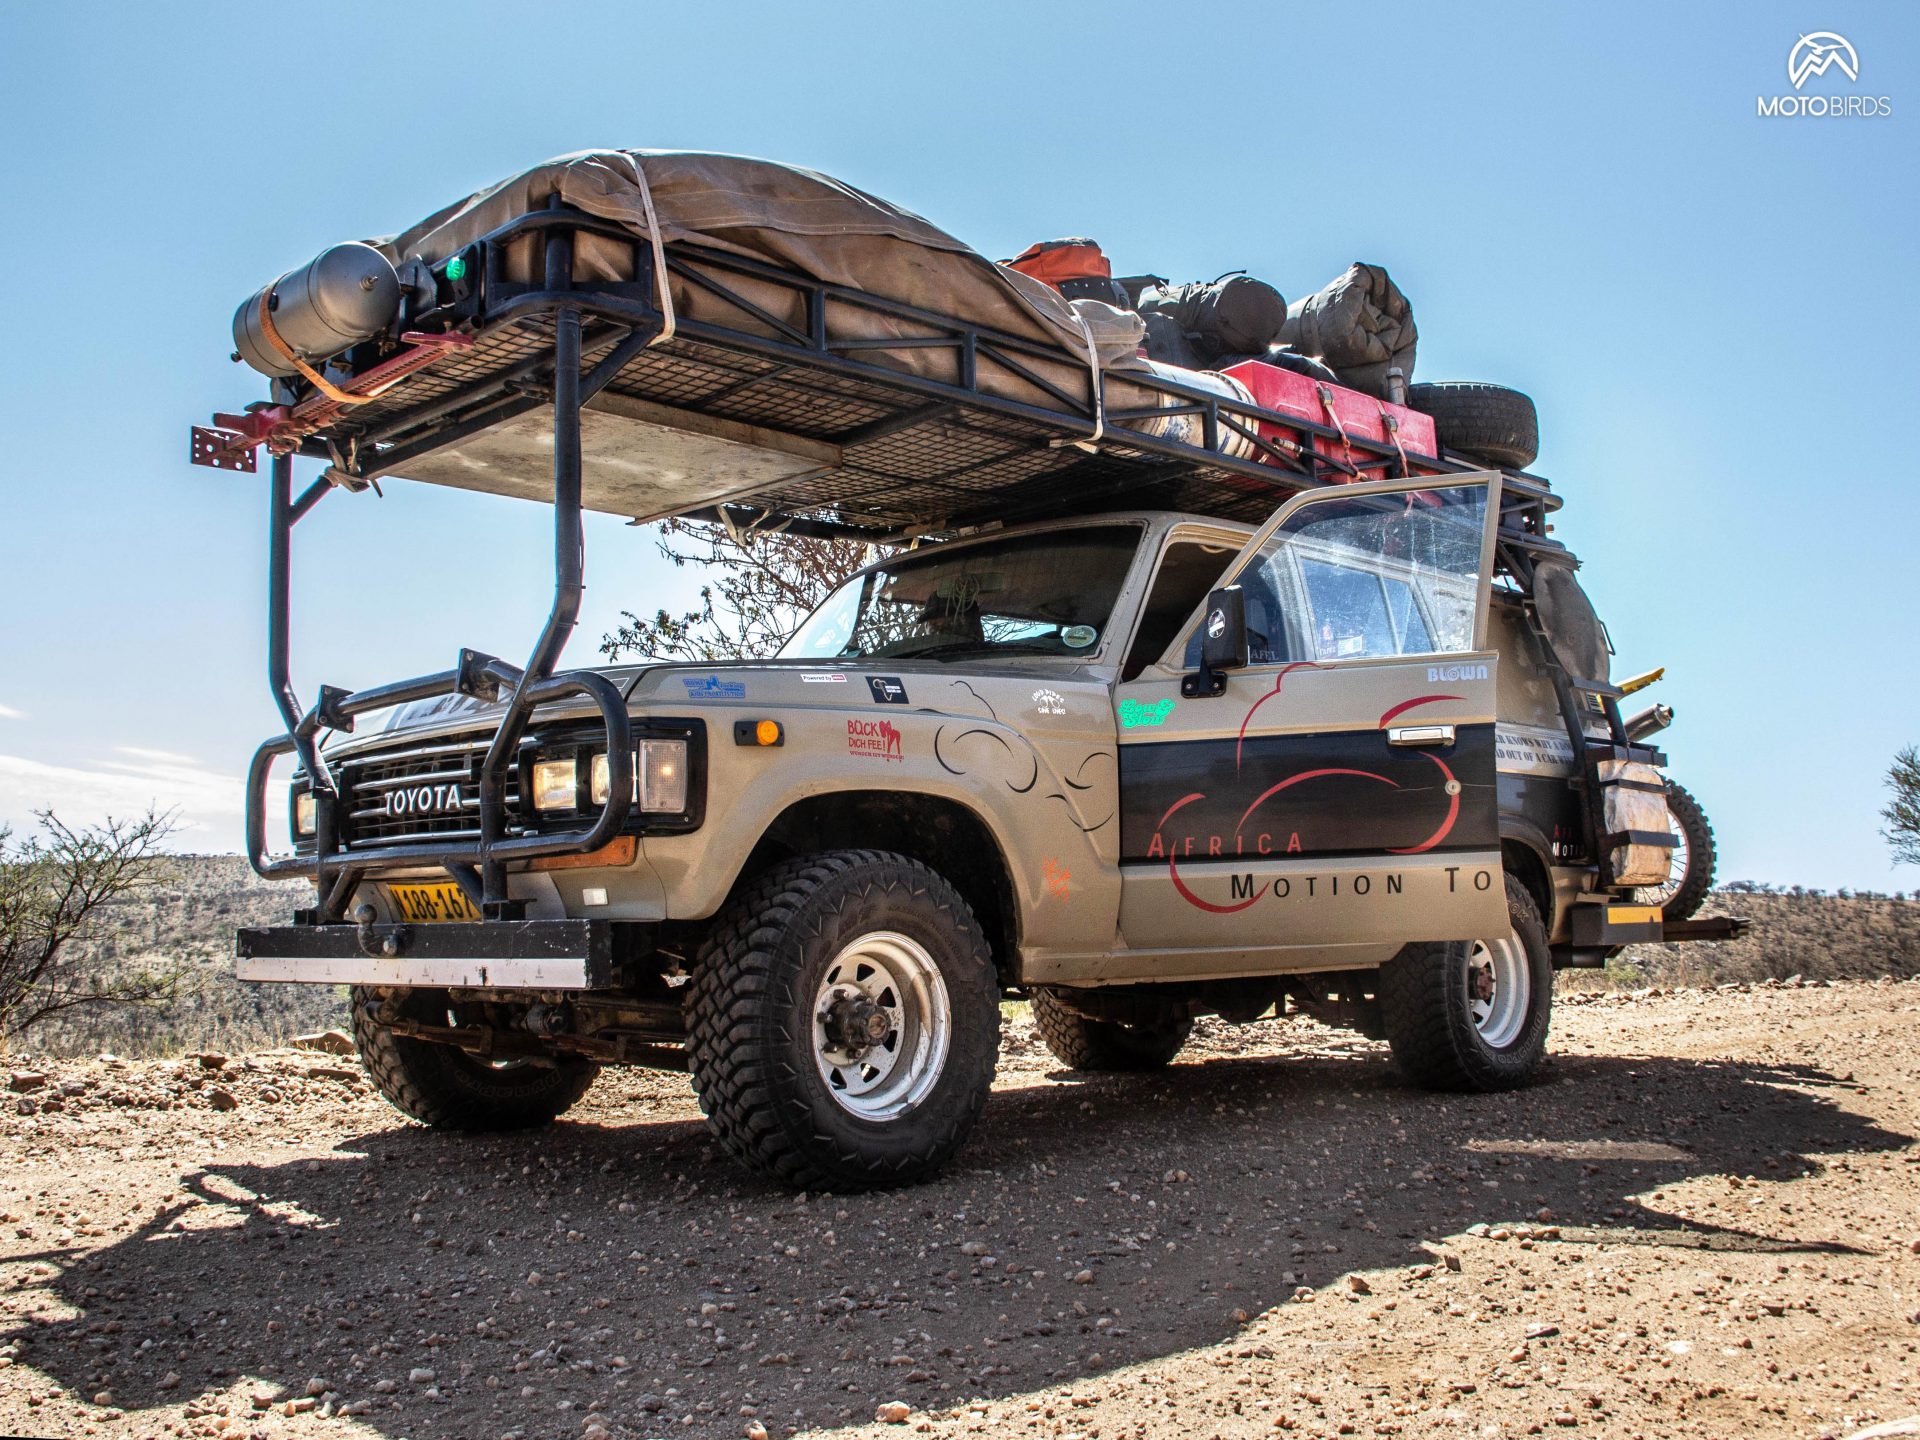 support car in Namibia during a motorcycle tour with MotoBirds